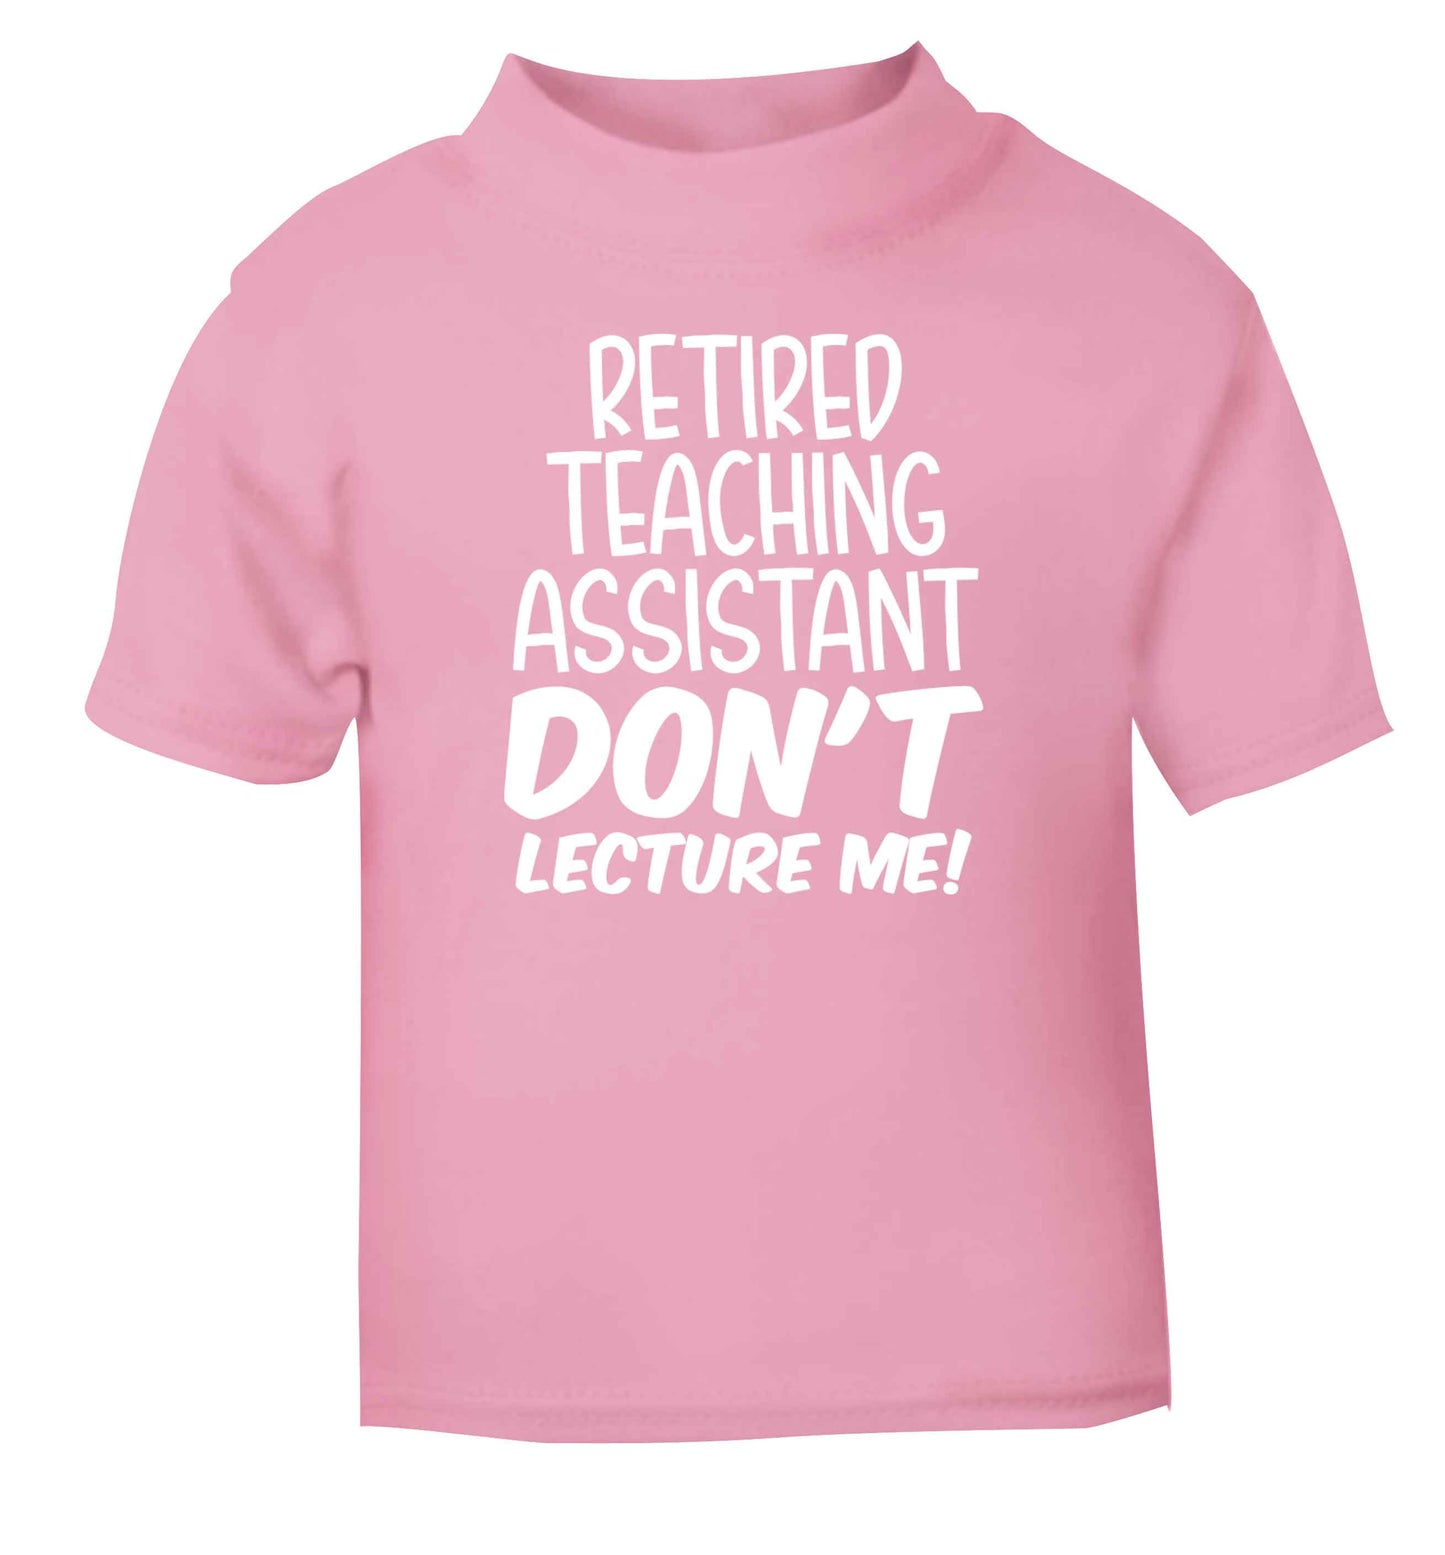 Retired teaching assistant don't lecture me light pink Baby Toddler Tshirt 2 Years